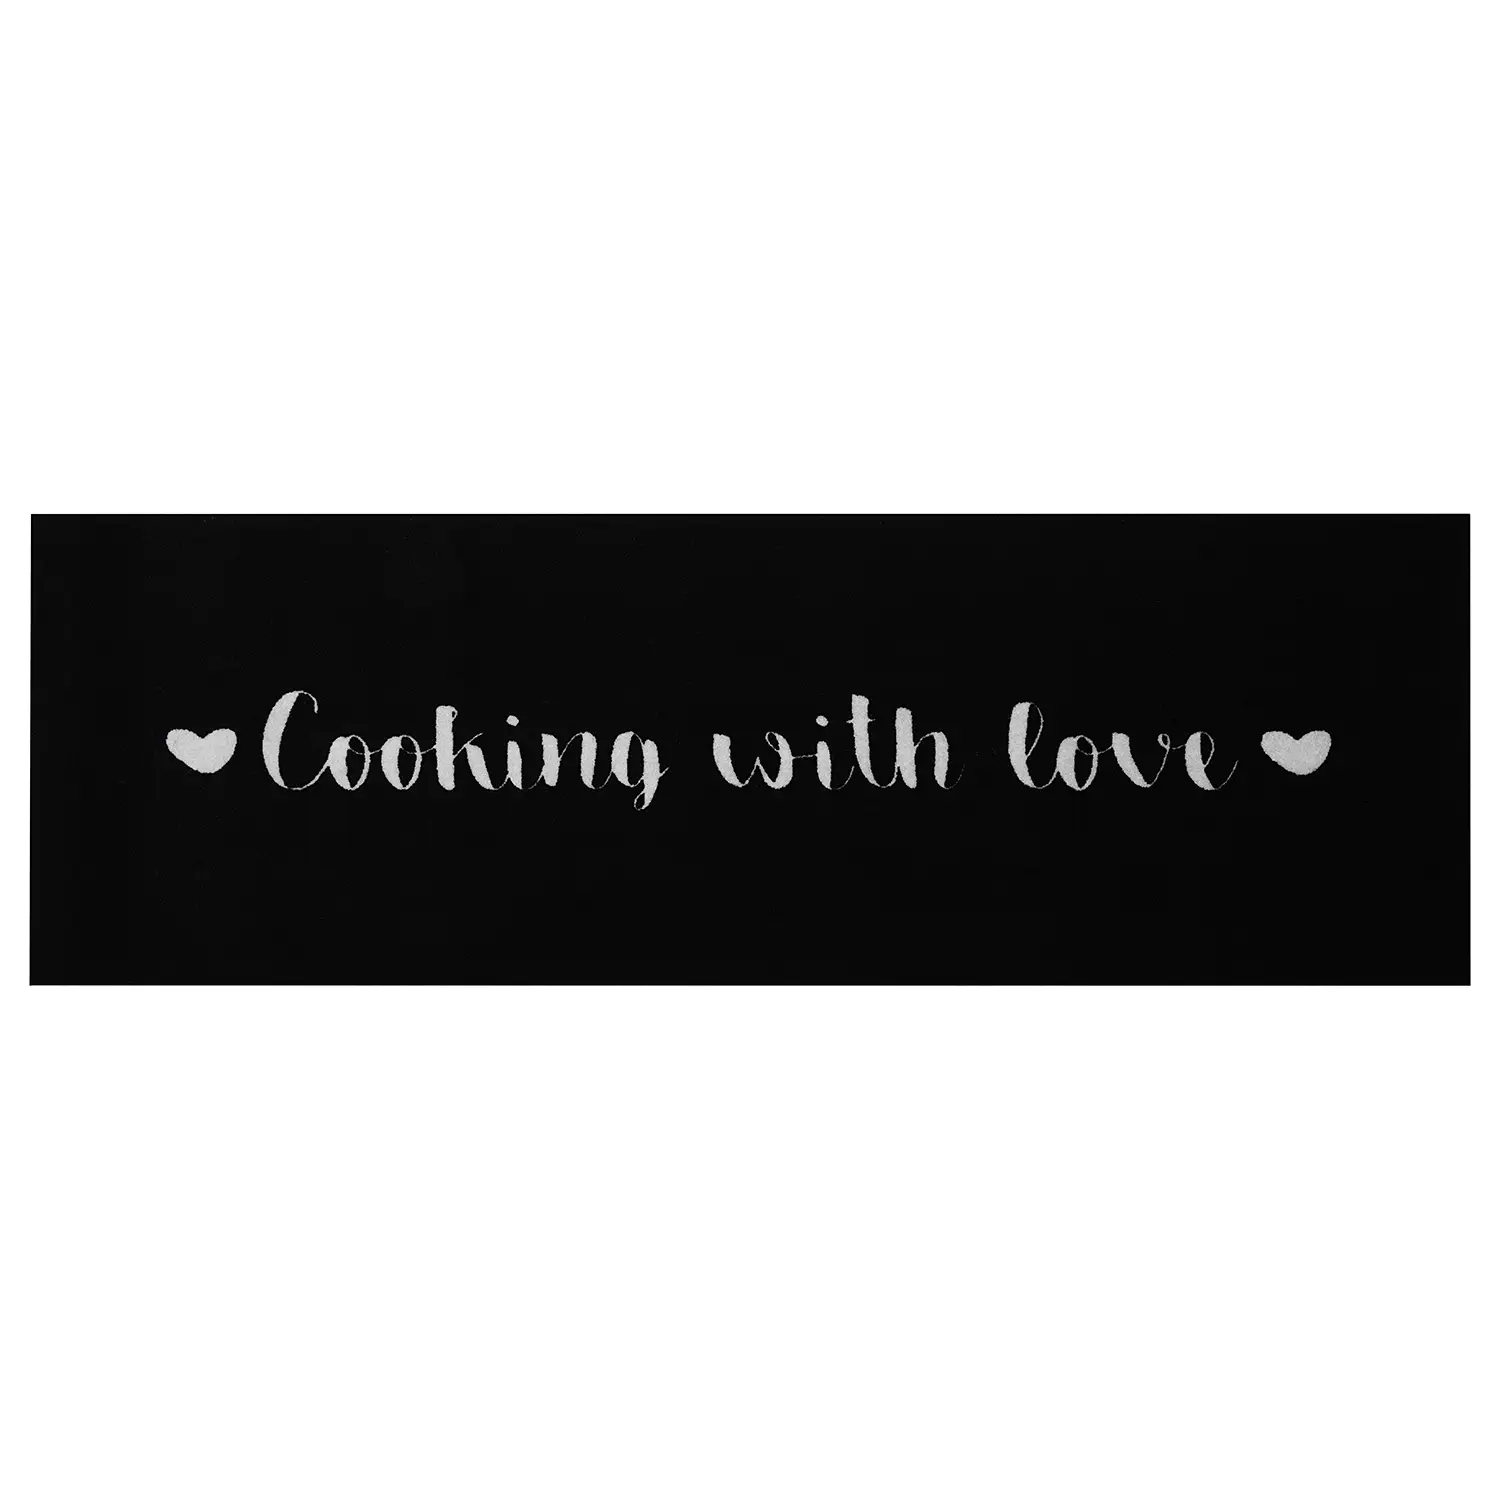 K眉chenl盲ufer Cooking Love with